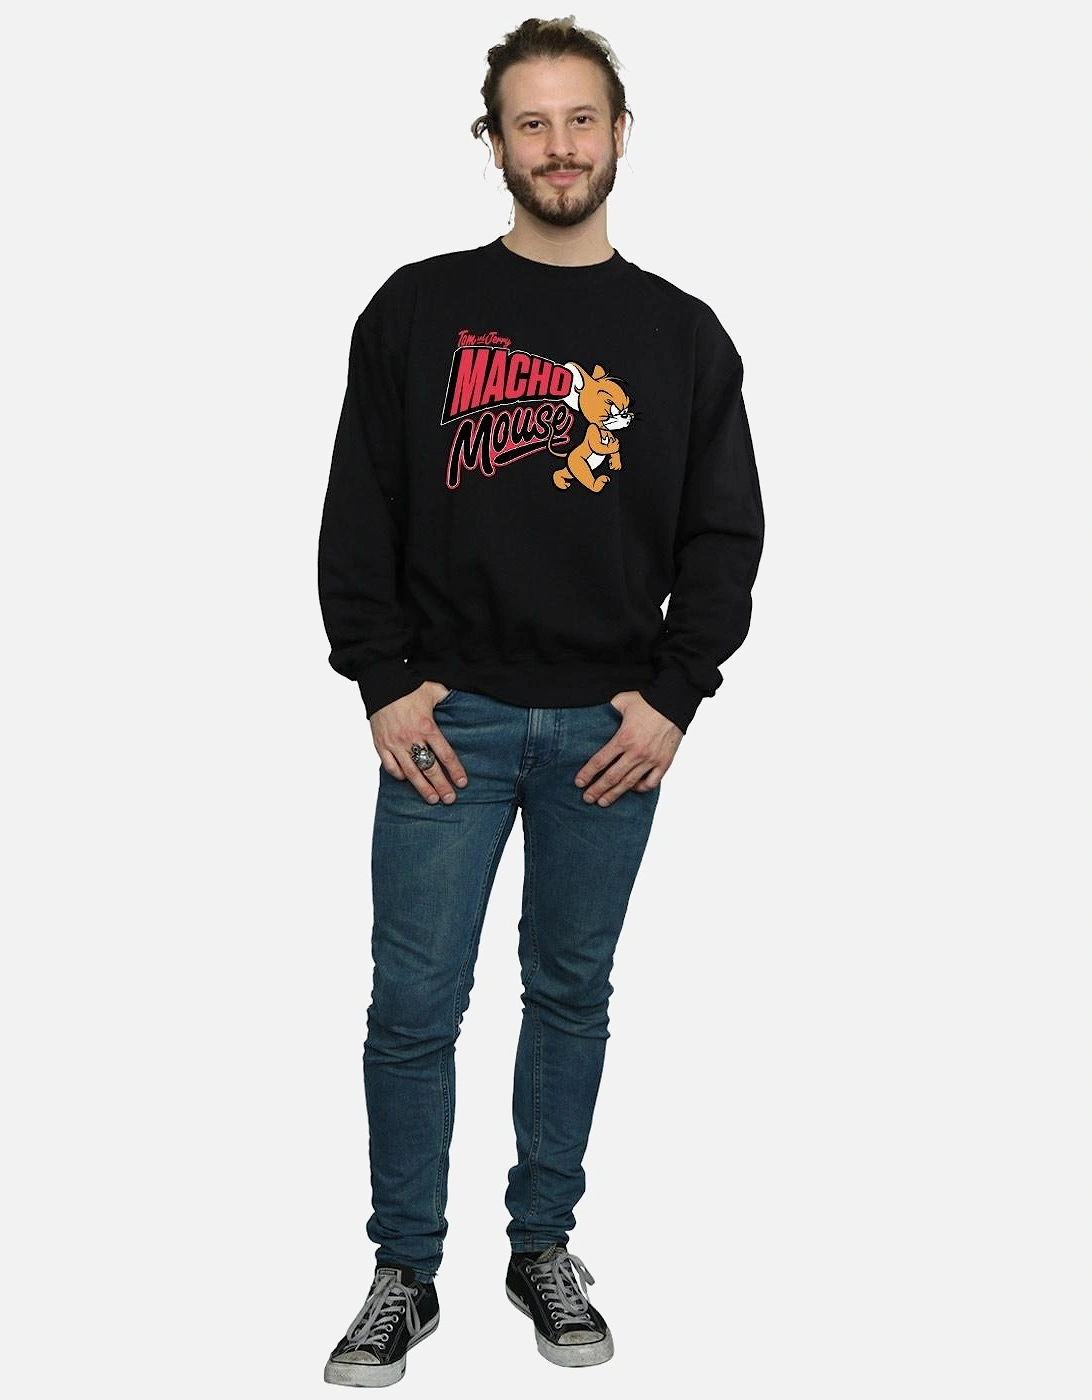 Tom And Jerry Mens Macho Mouse Sweatshirt